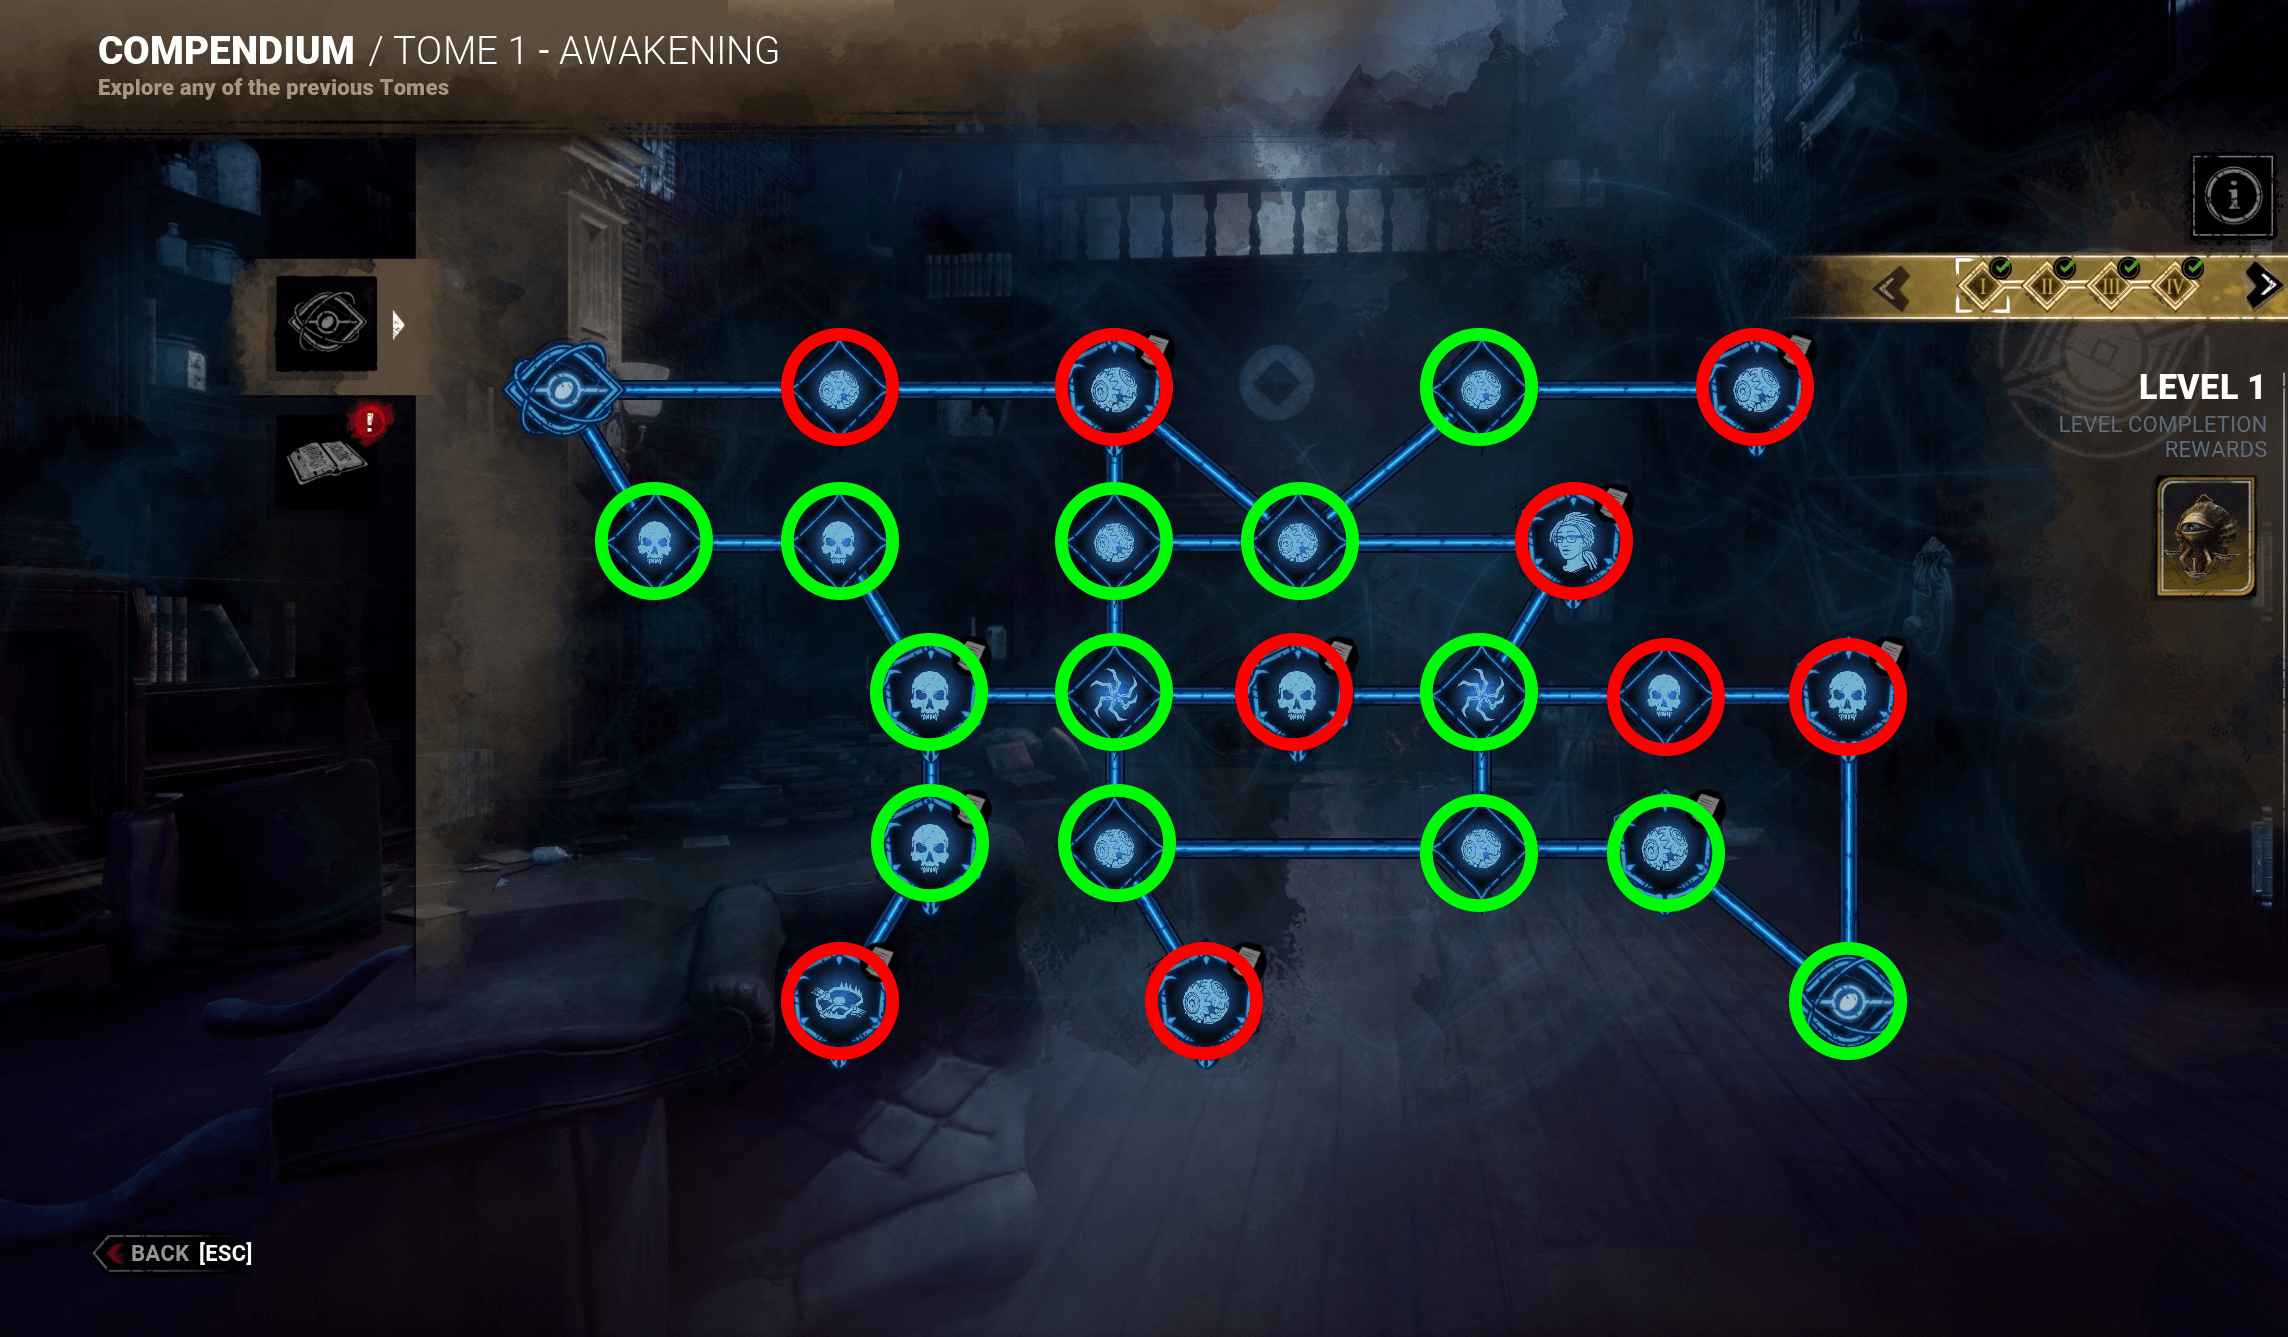 Dead by Daylight WIP - Archive Path to save the most Blood Points - Tome 1 Awakening - 334C7C1